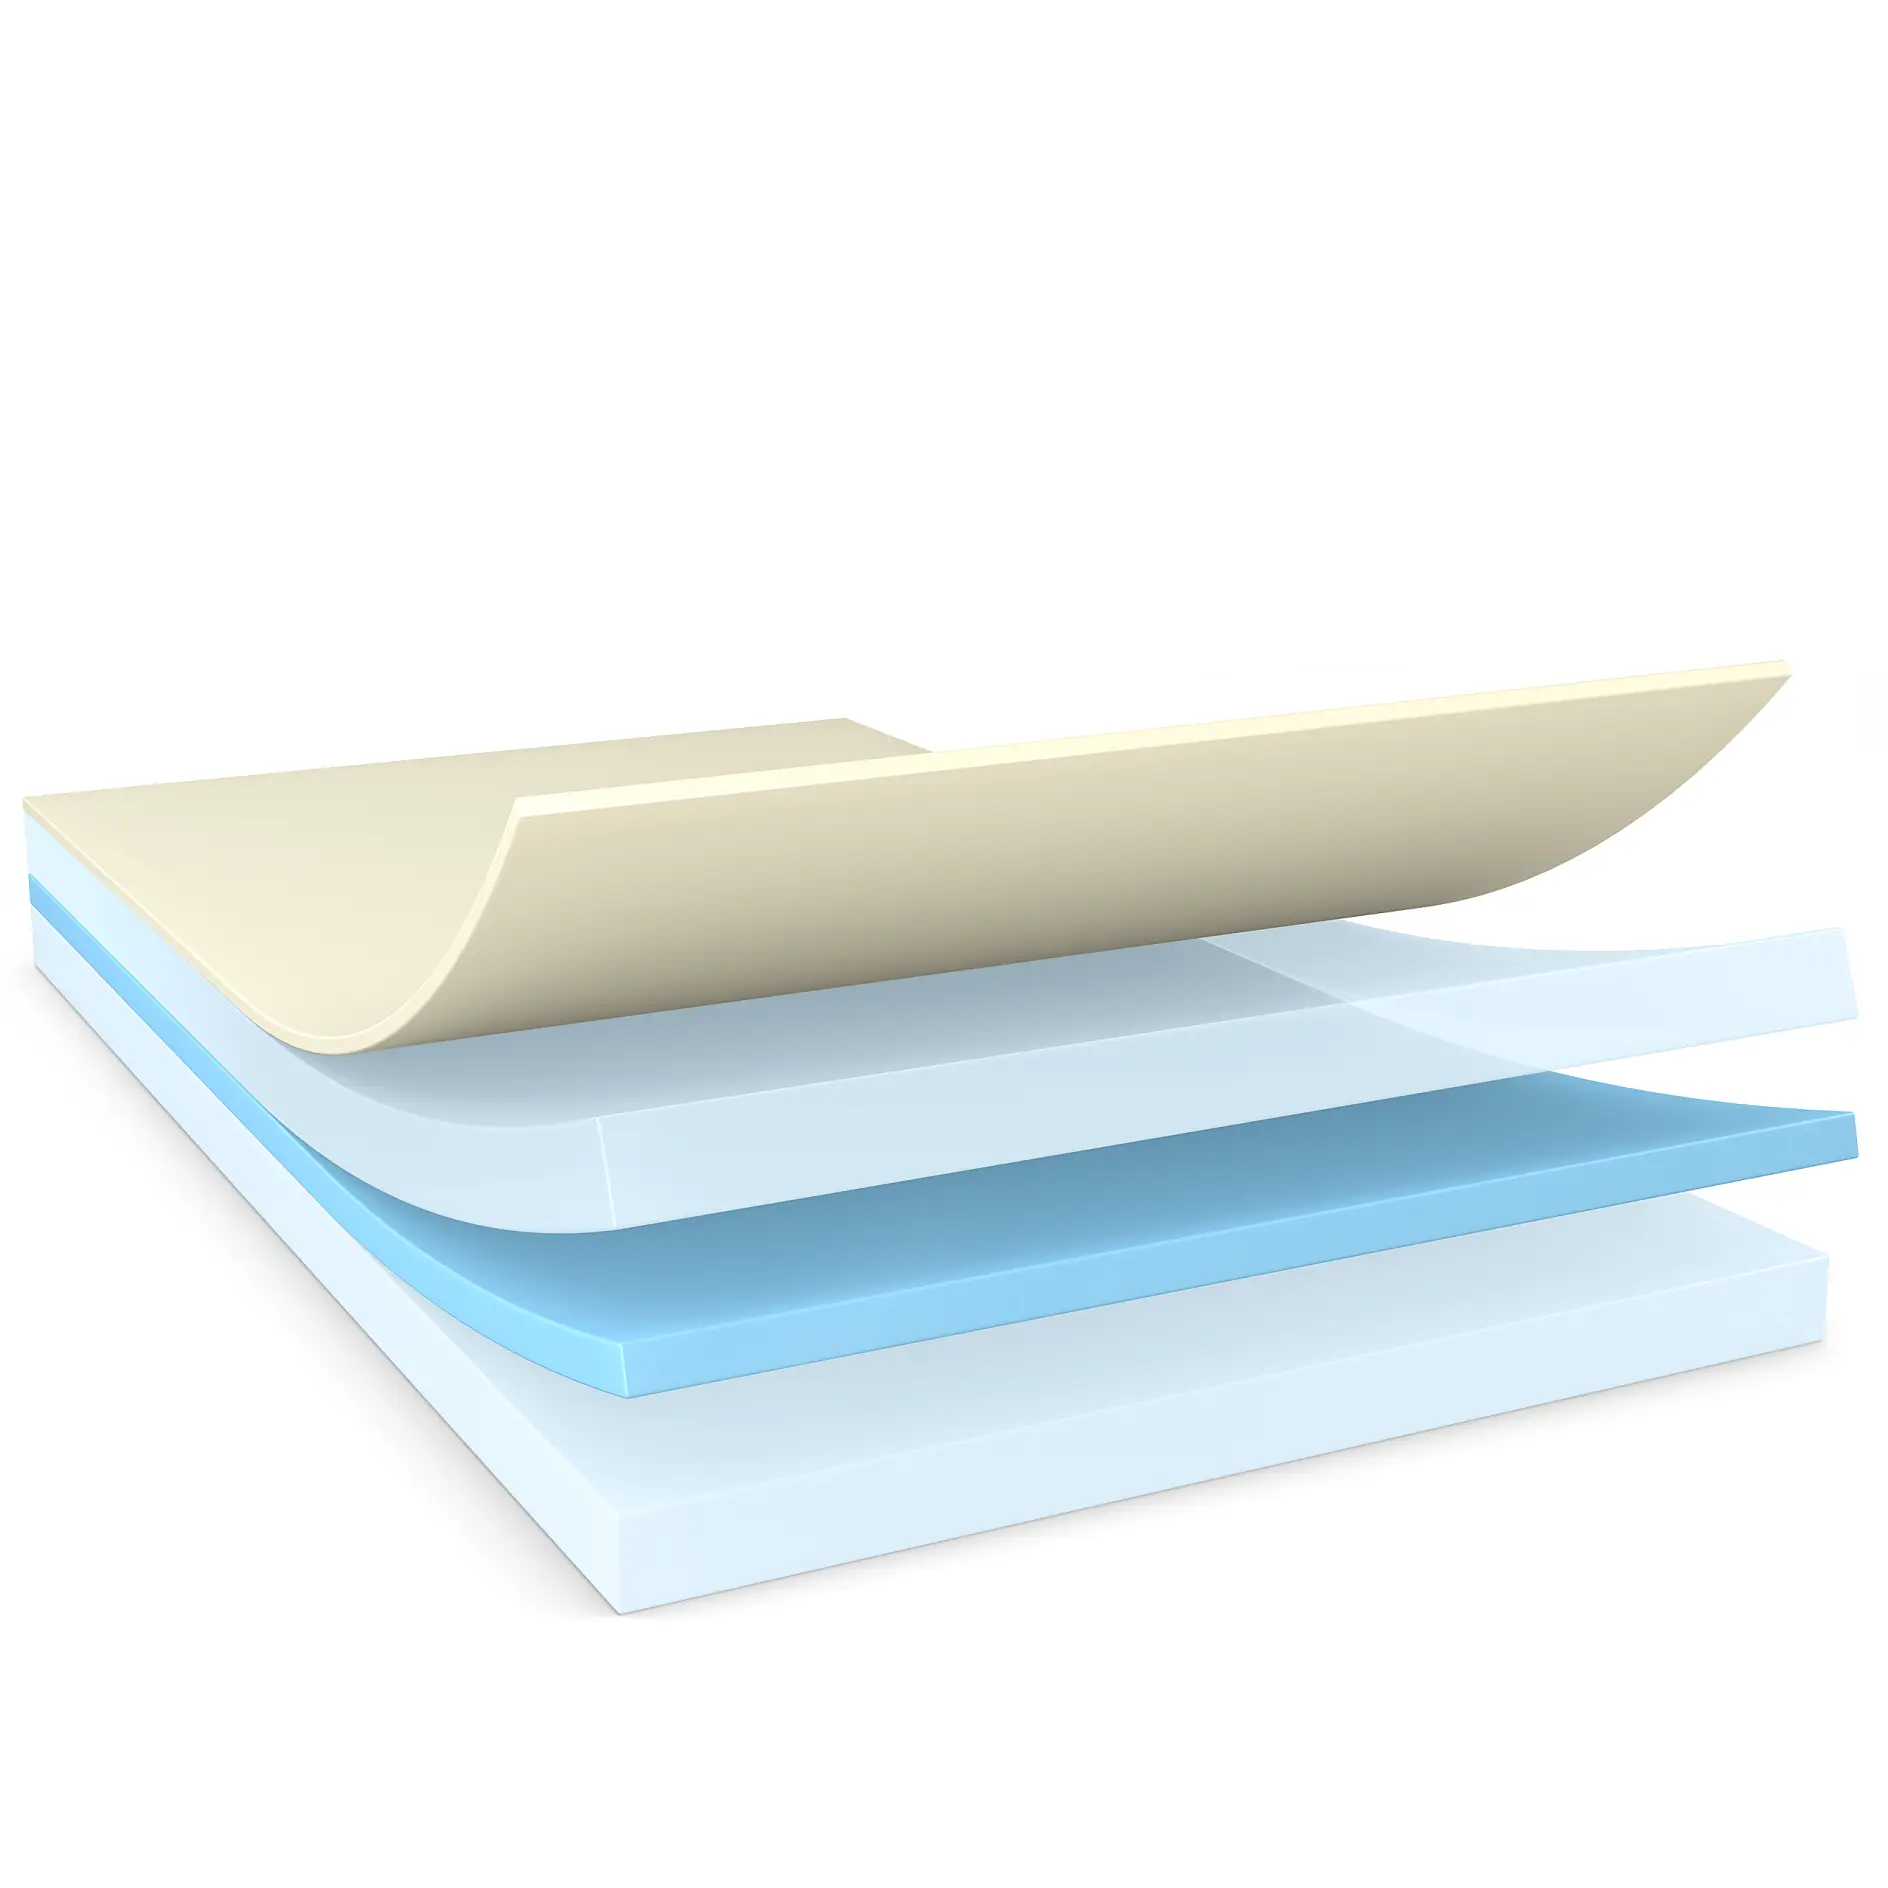 Product-Illustration_Double-Sided_General-Mounting_300dpi.png